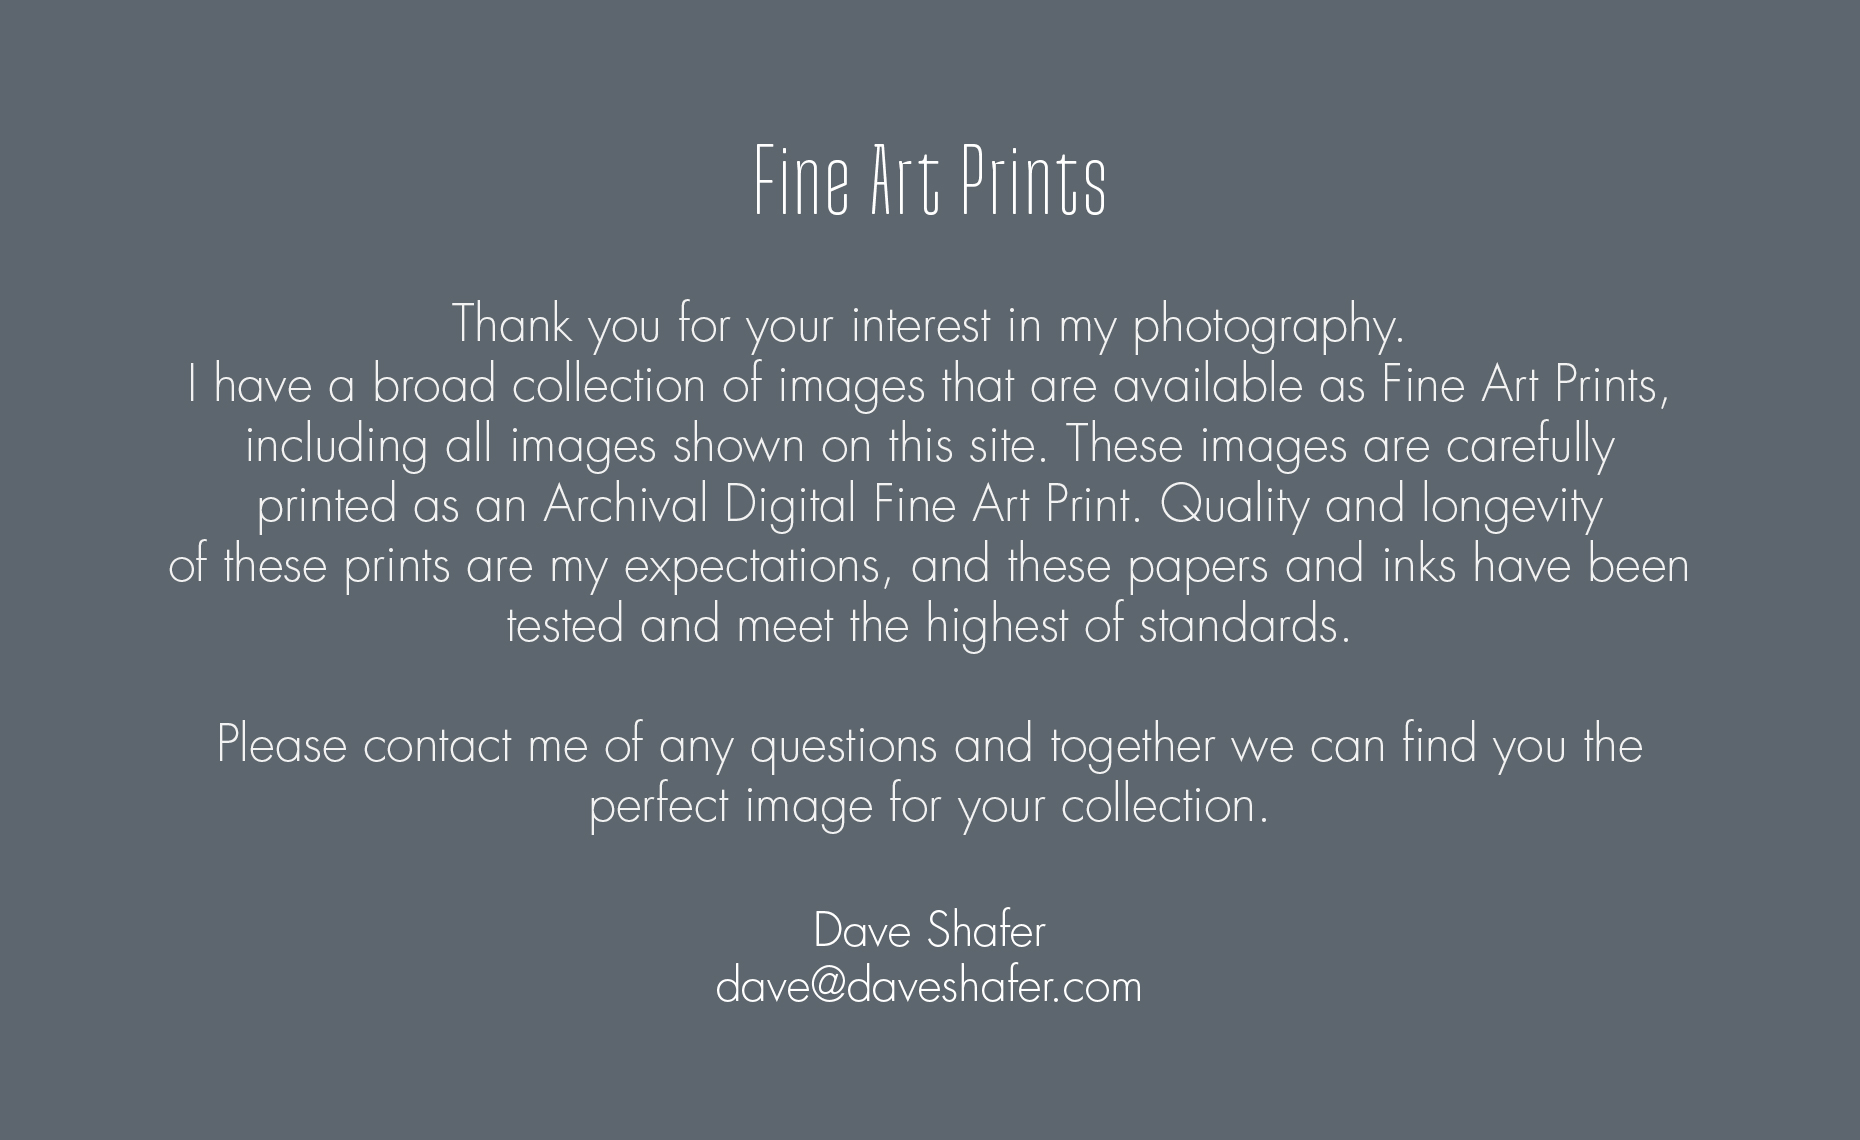 IntroCards_FineArt_2